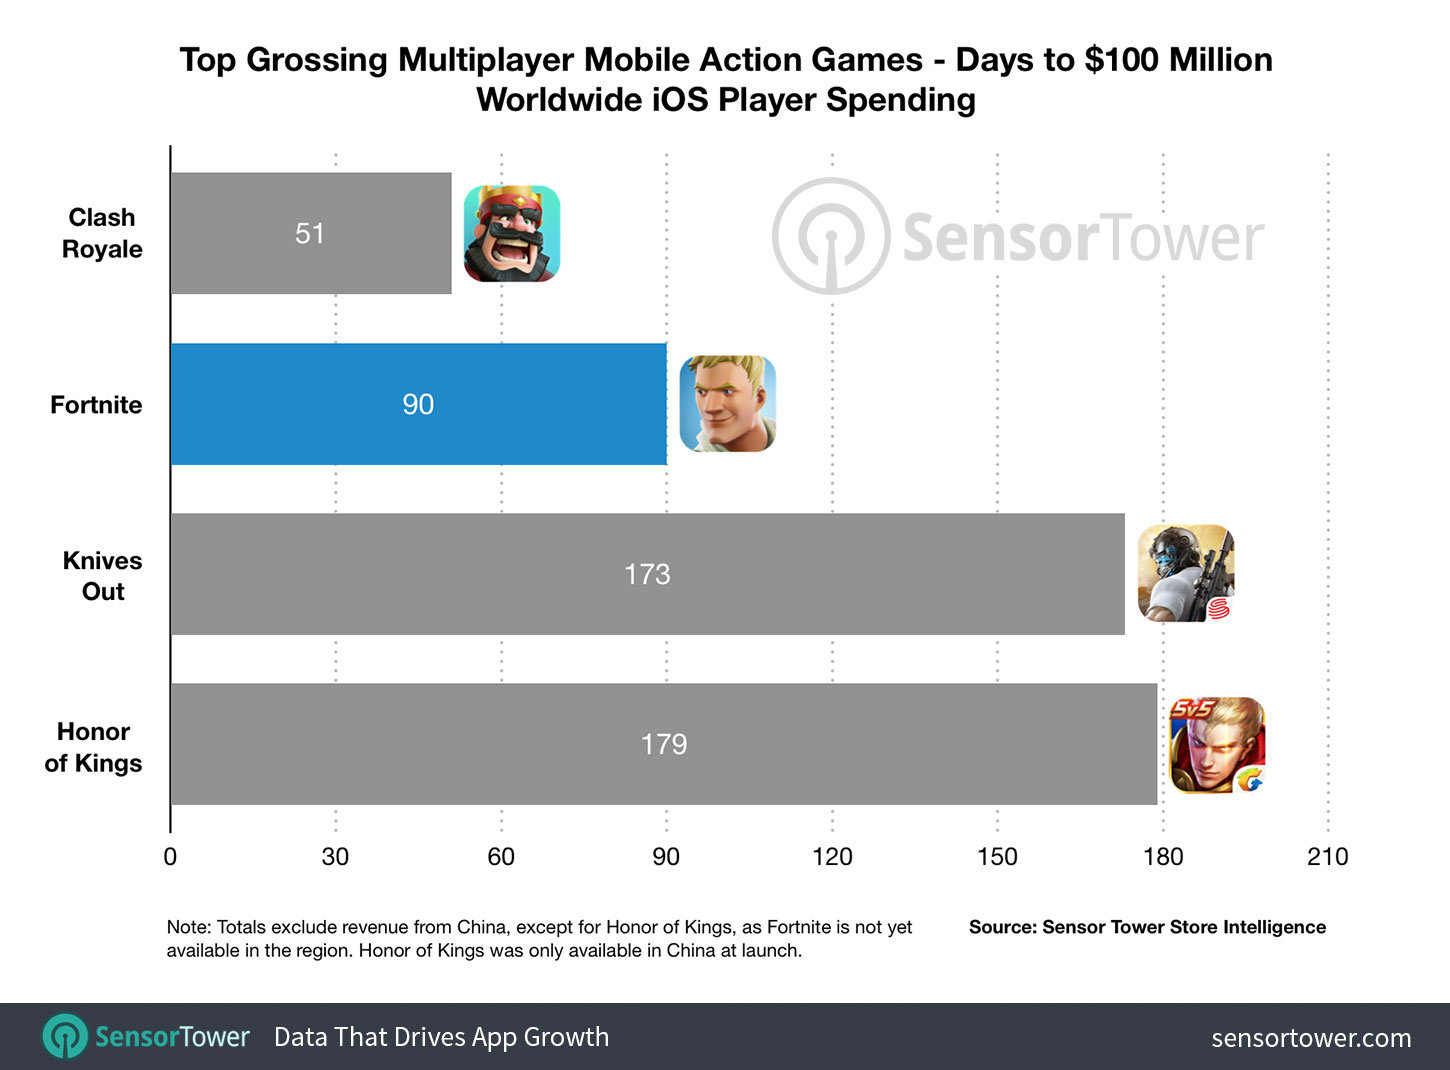 Chart showing how long it took Fortnite to gross $100 million on iOS compared to other top grossing mobile multiplayer games